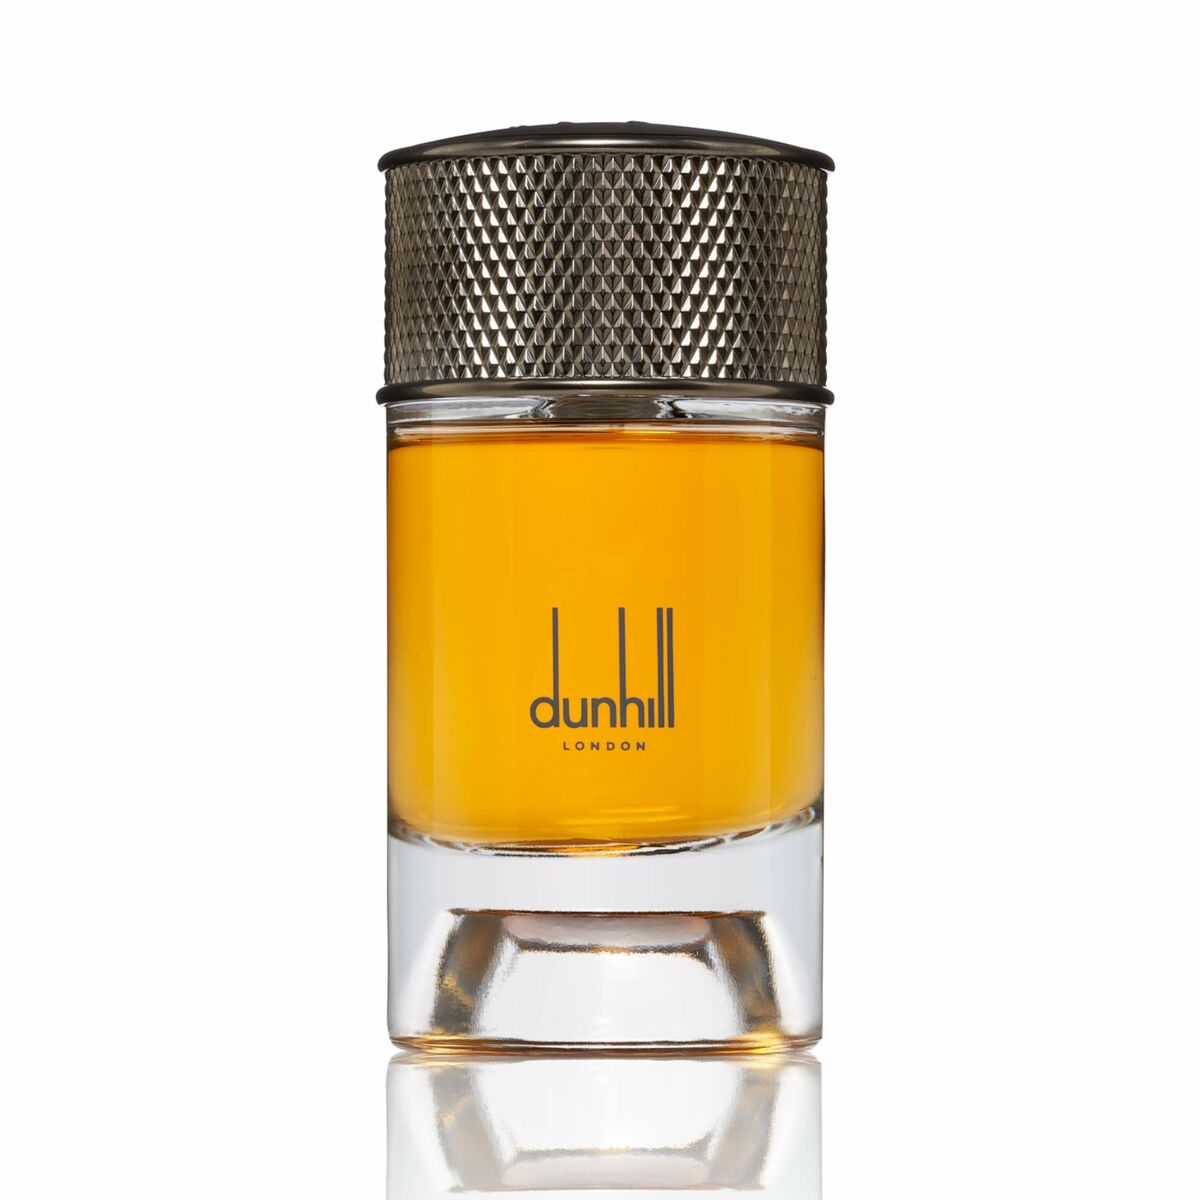 Herenparfum EDP Dunhill Signature Collection Moroccan Amber 100 ml